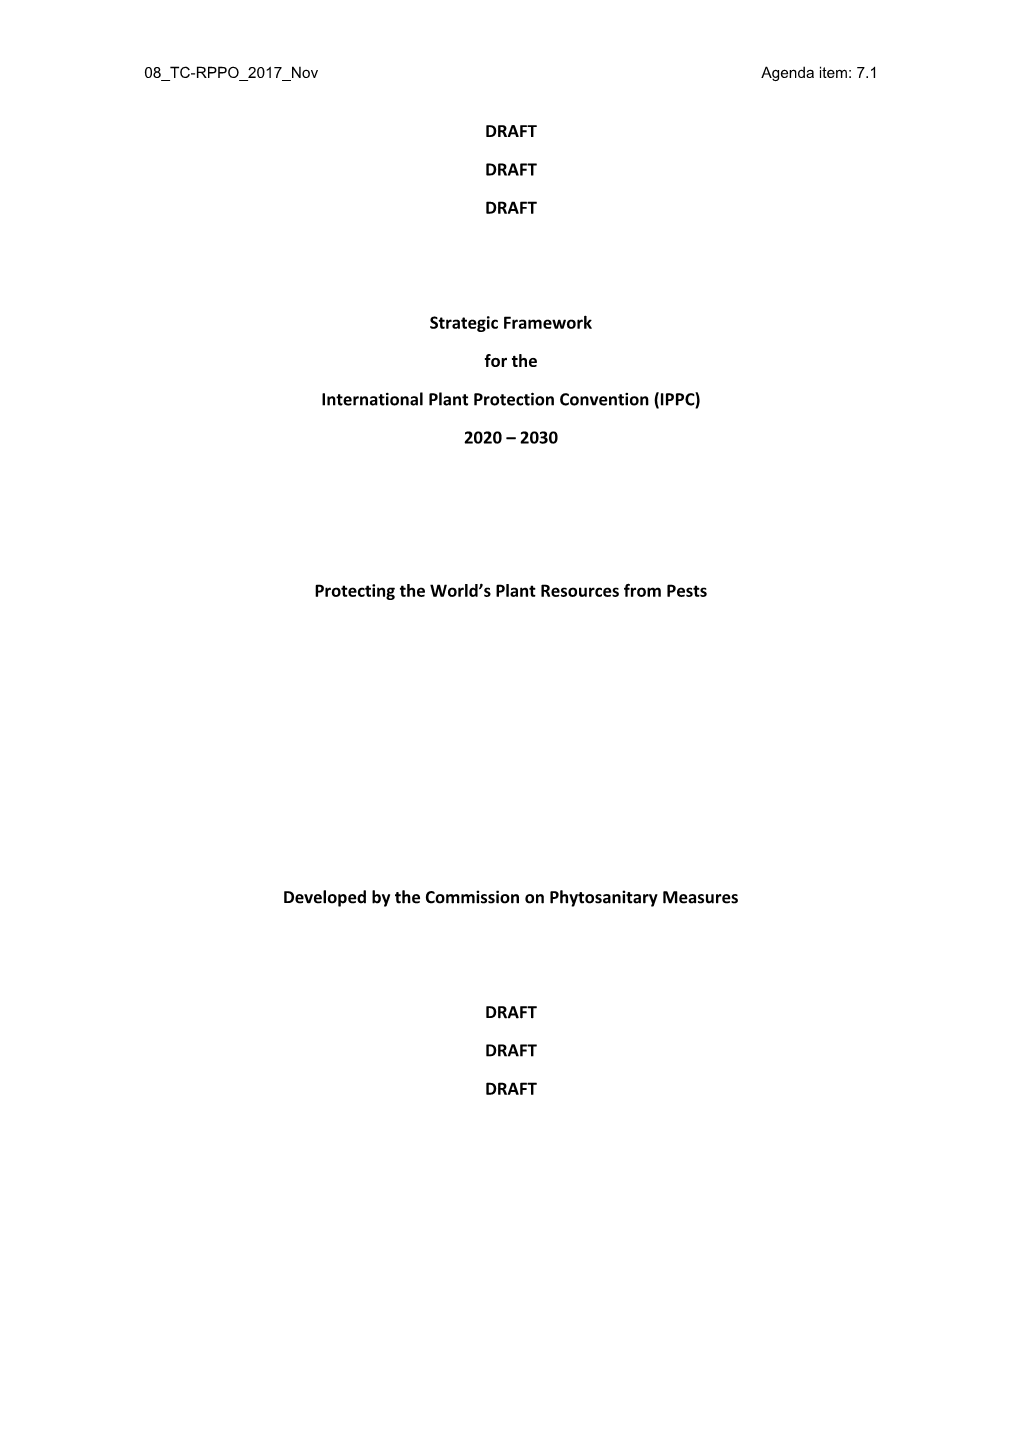 DRAFT Strategic Framework for the International Plant Protection Convention (IPPC) 2020 2030